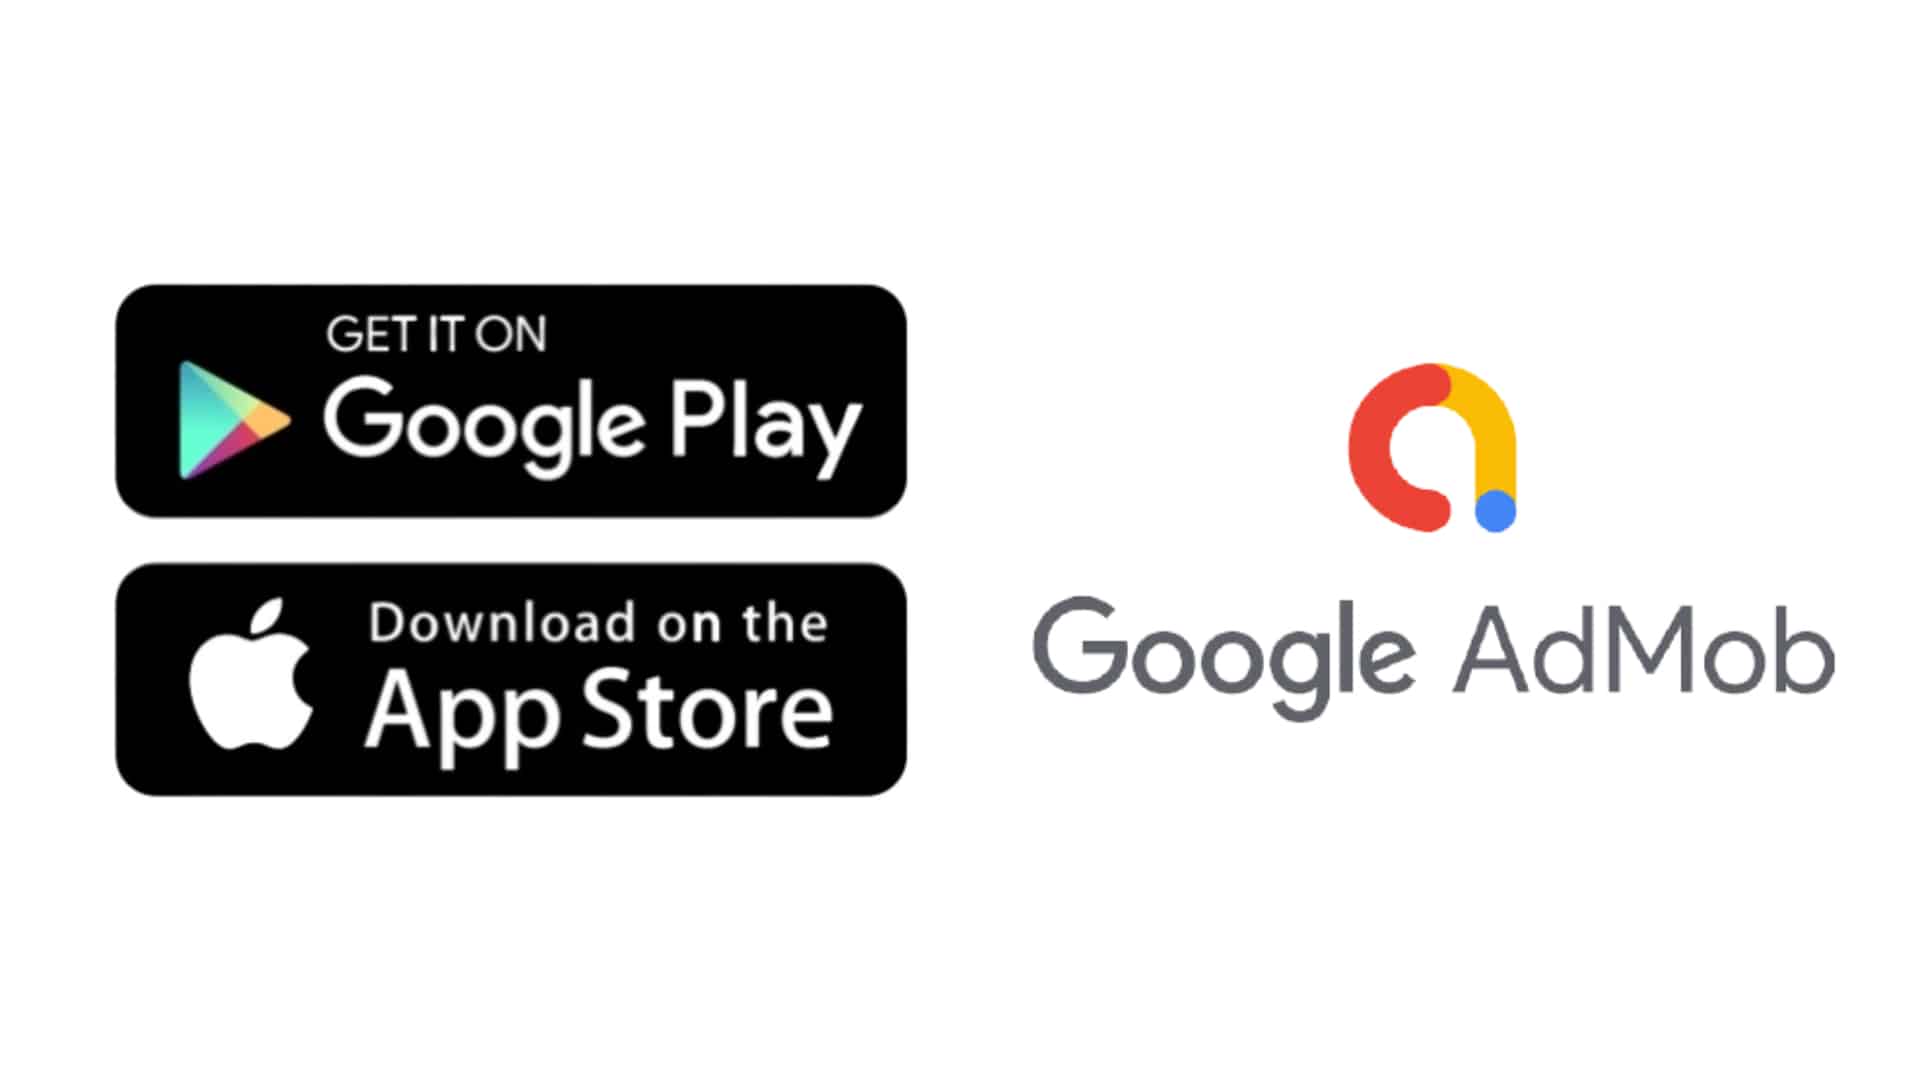 Link New Apps on AdMob instantly